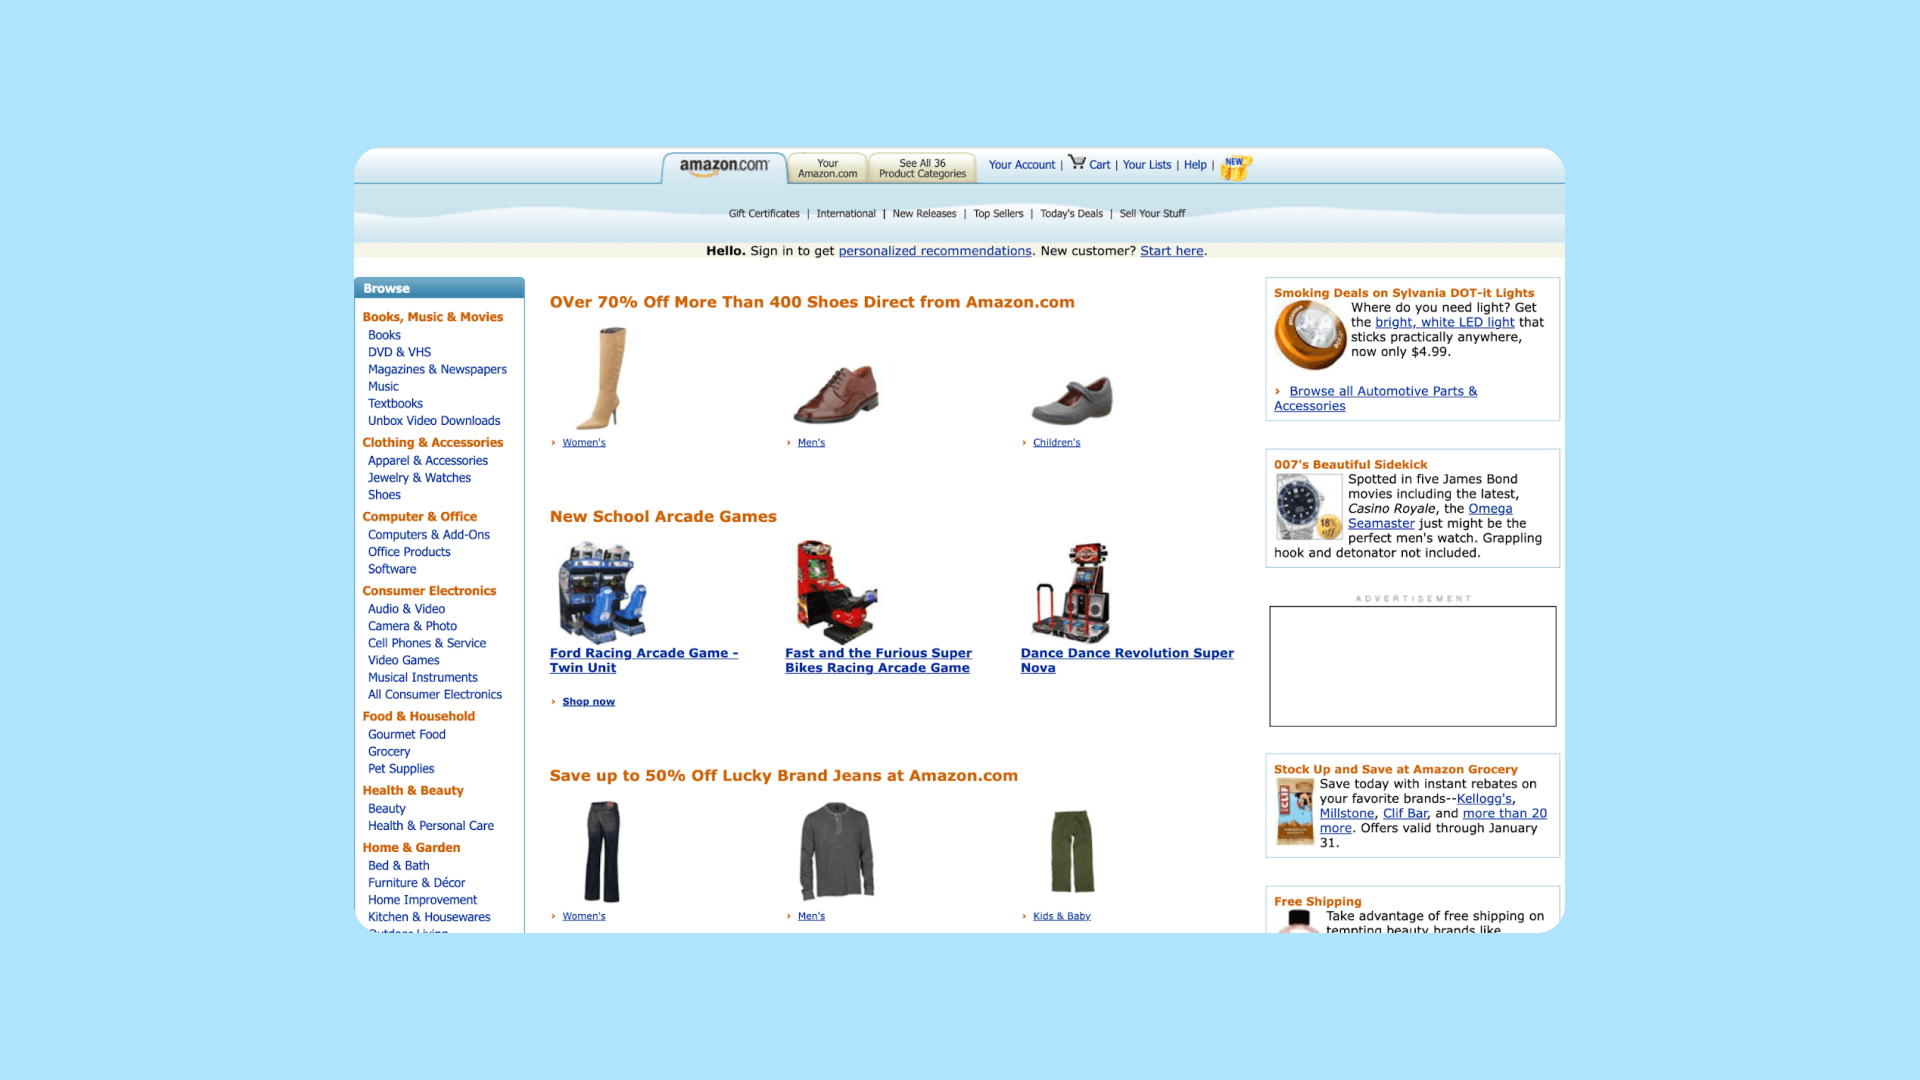 A screenshot of Amazon's 2007 marketplace. It features simple product images and text links to product categories.